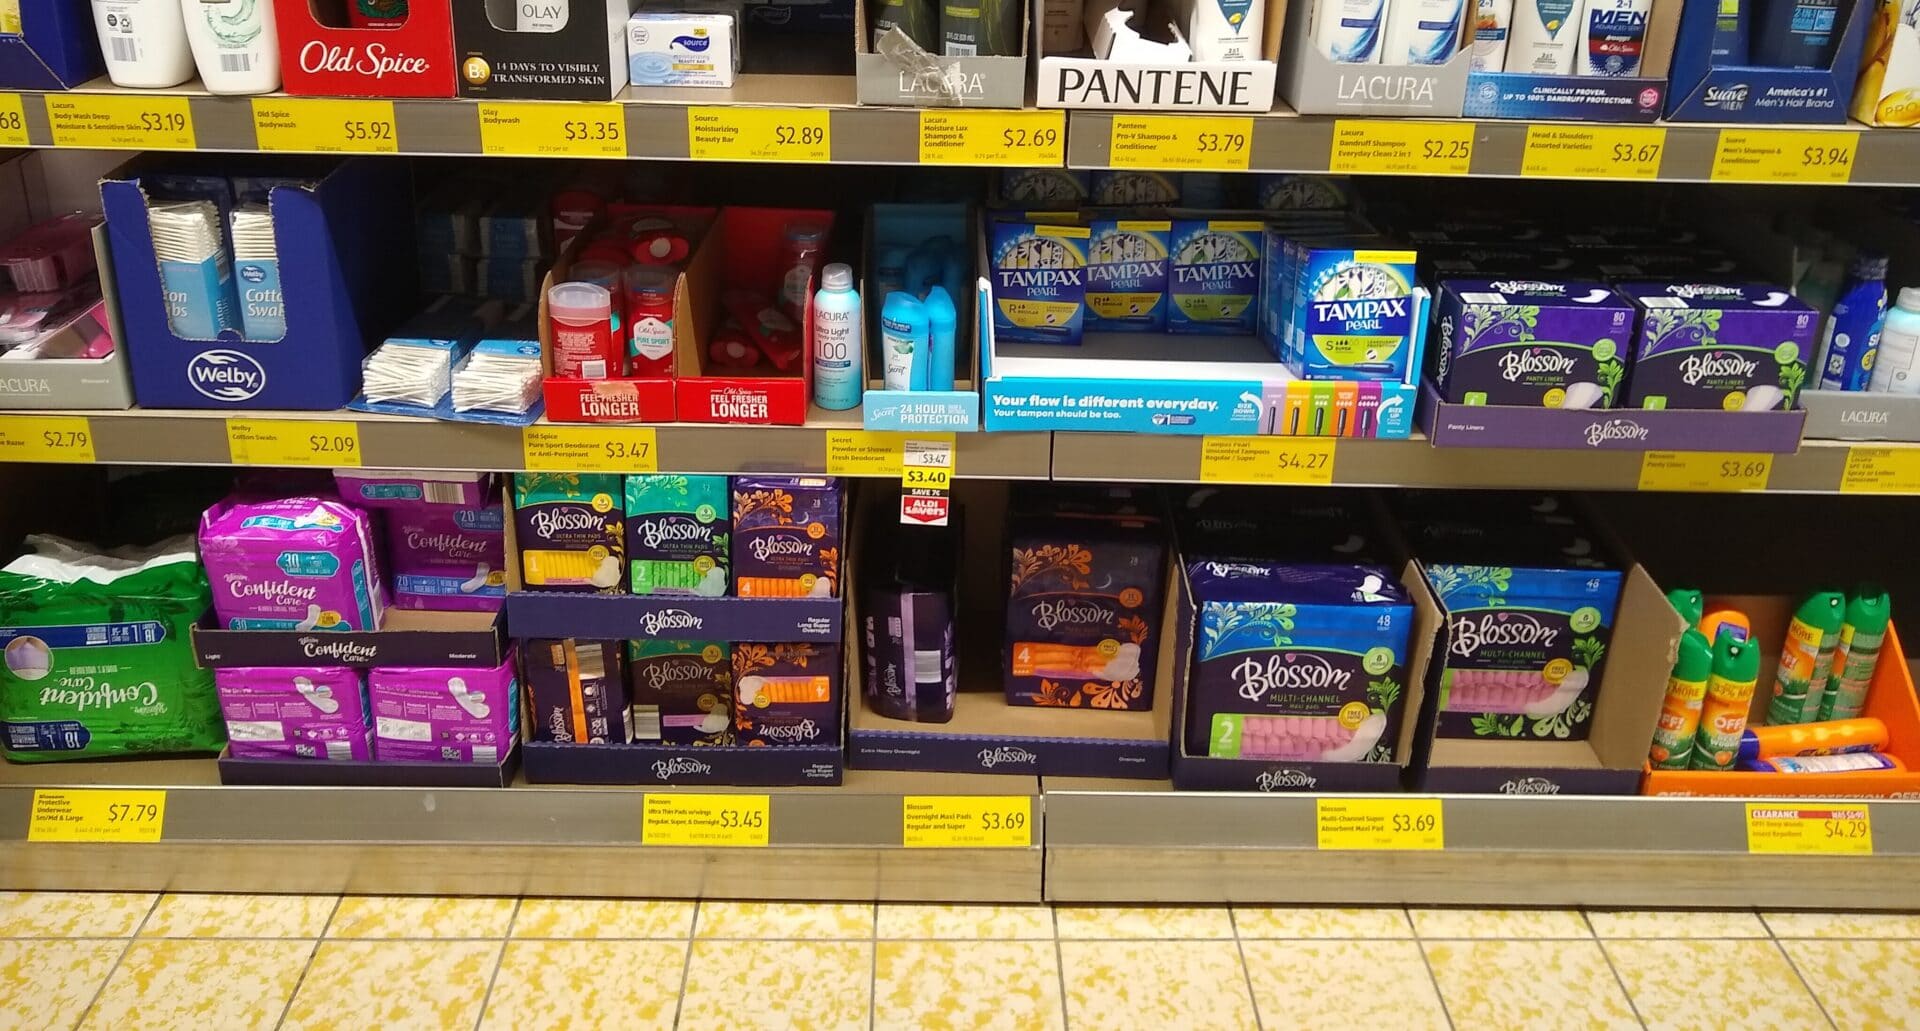 Aldi Affected by the Tampon Shortage? ALDI REVIEWER